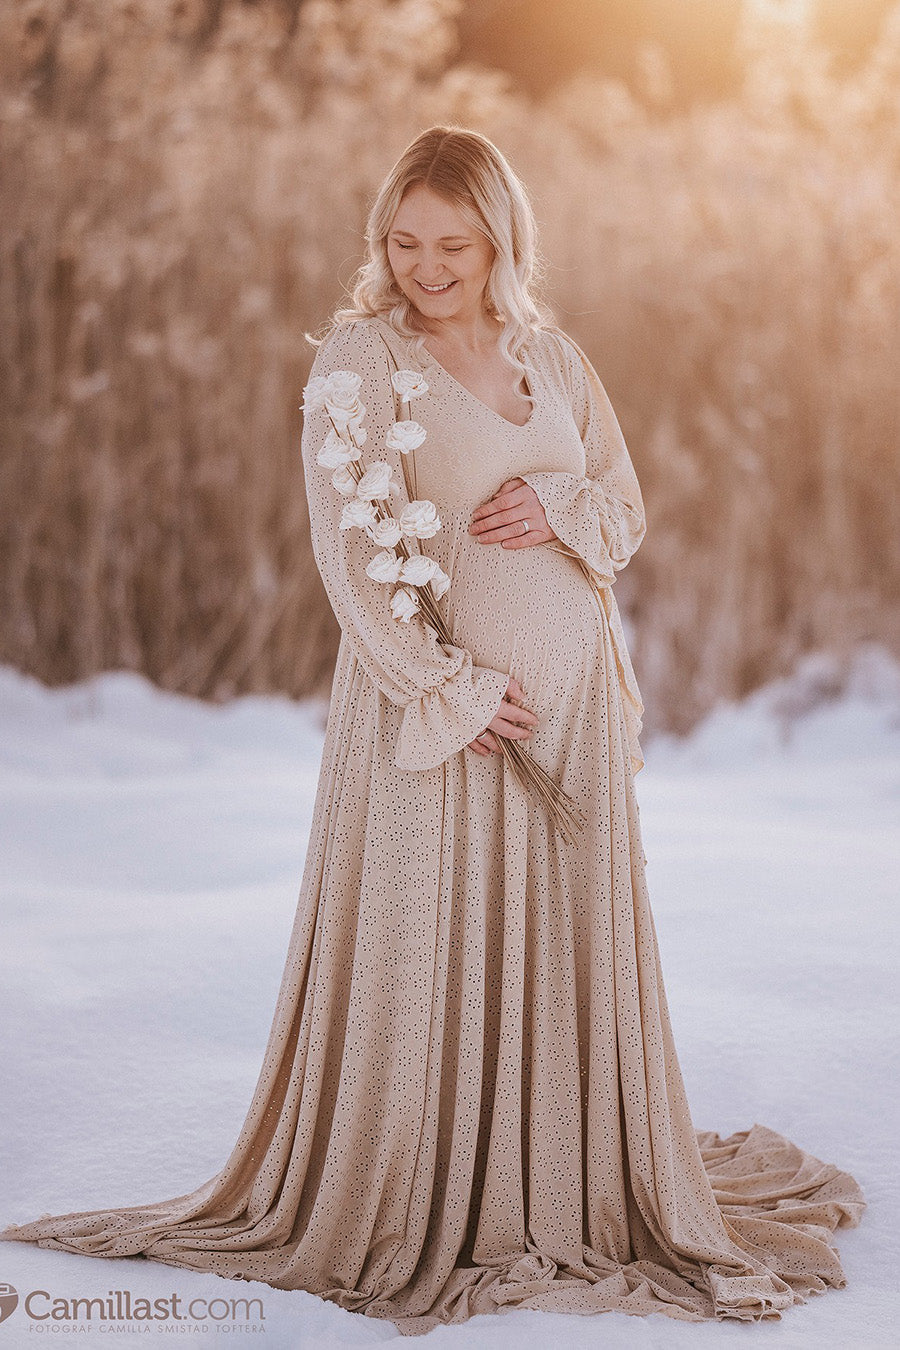 blond pregnant model poses outdoor in the snow wearing a sand long dress made of brocante jersey. the dress features long poet sleeves and a skirt long enough to cover the feet. the model faces down with a smile on her face and holds white flowers.